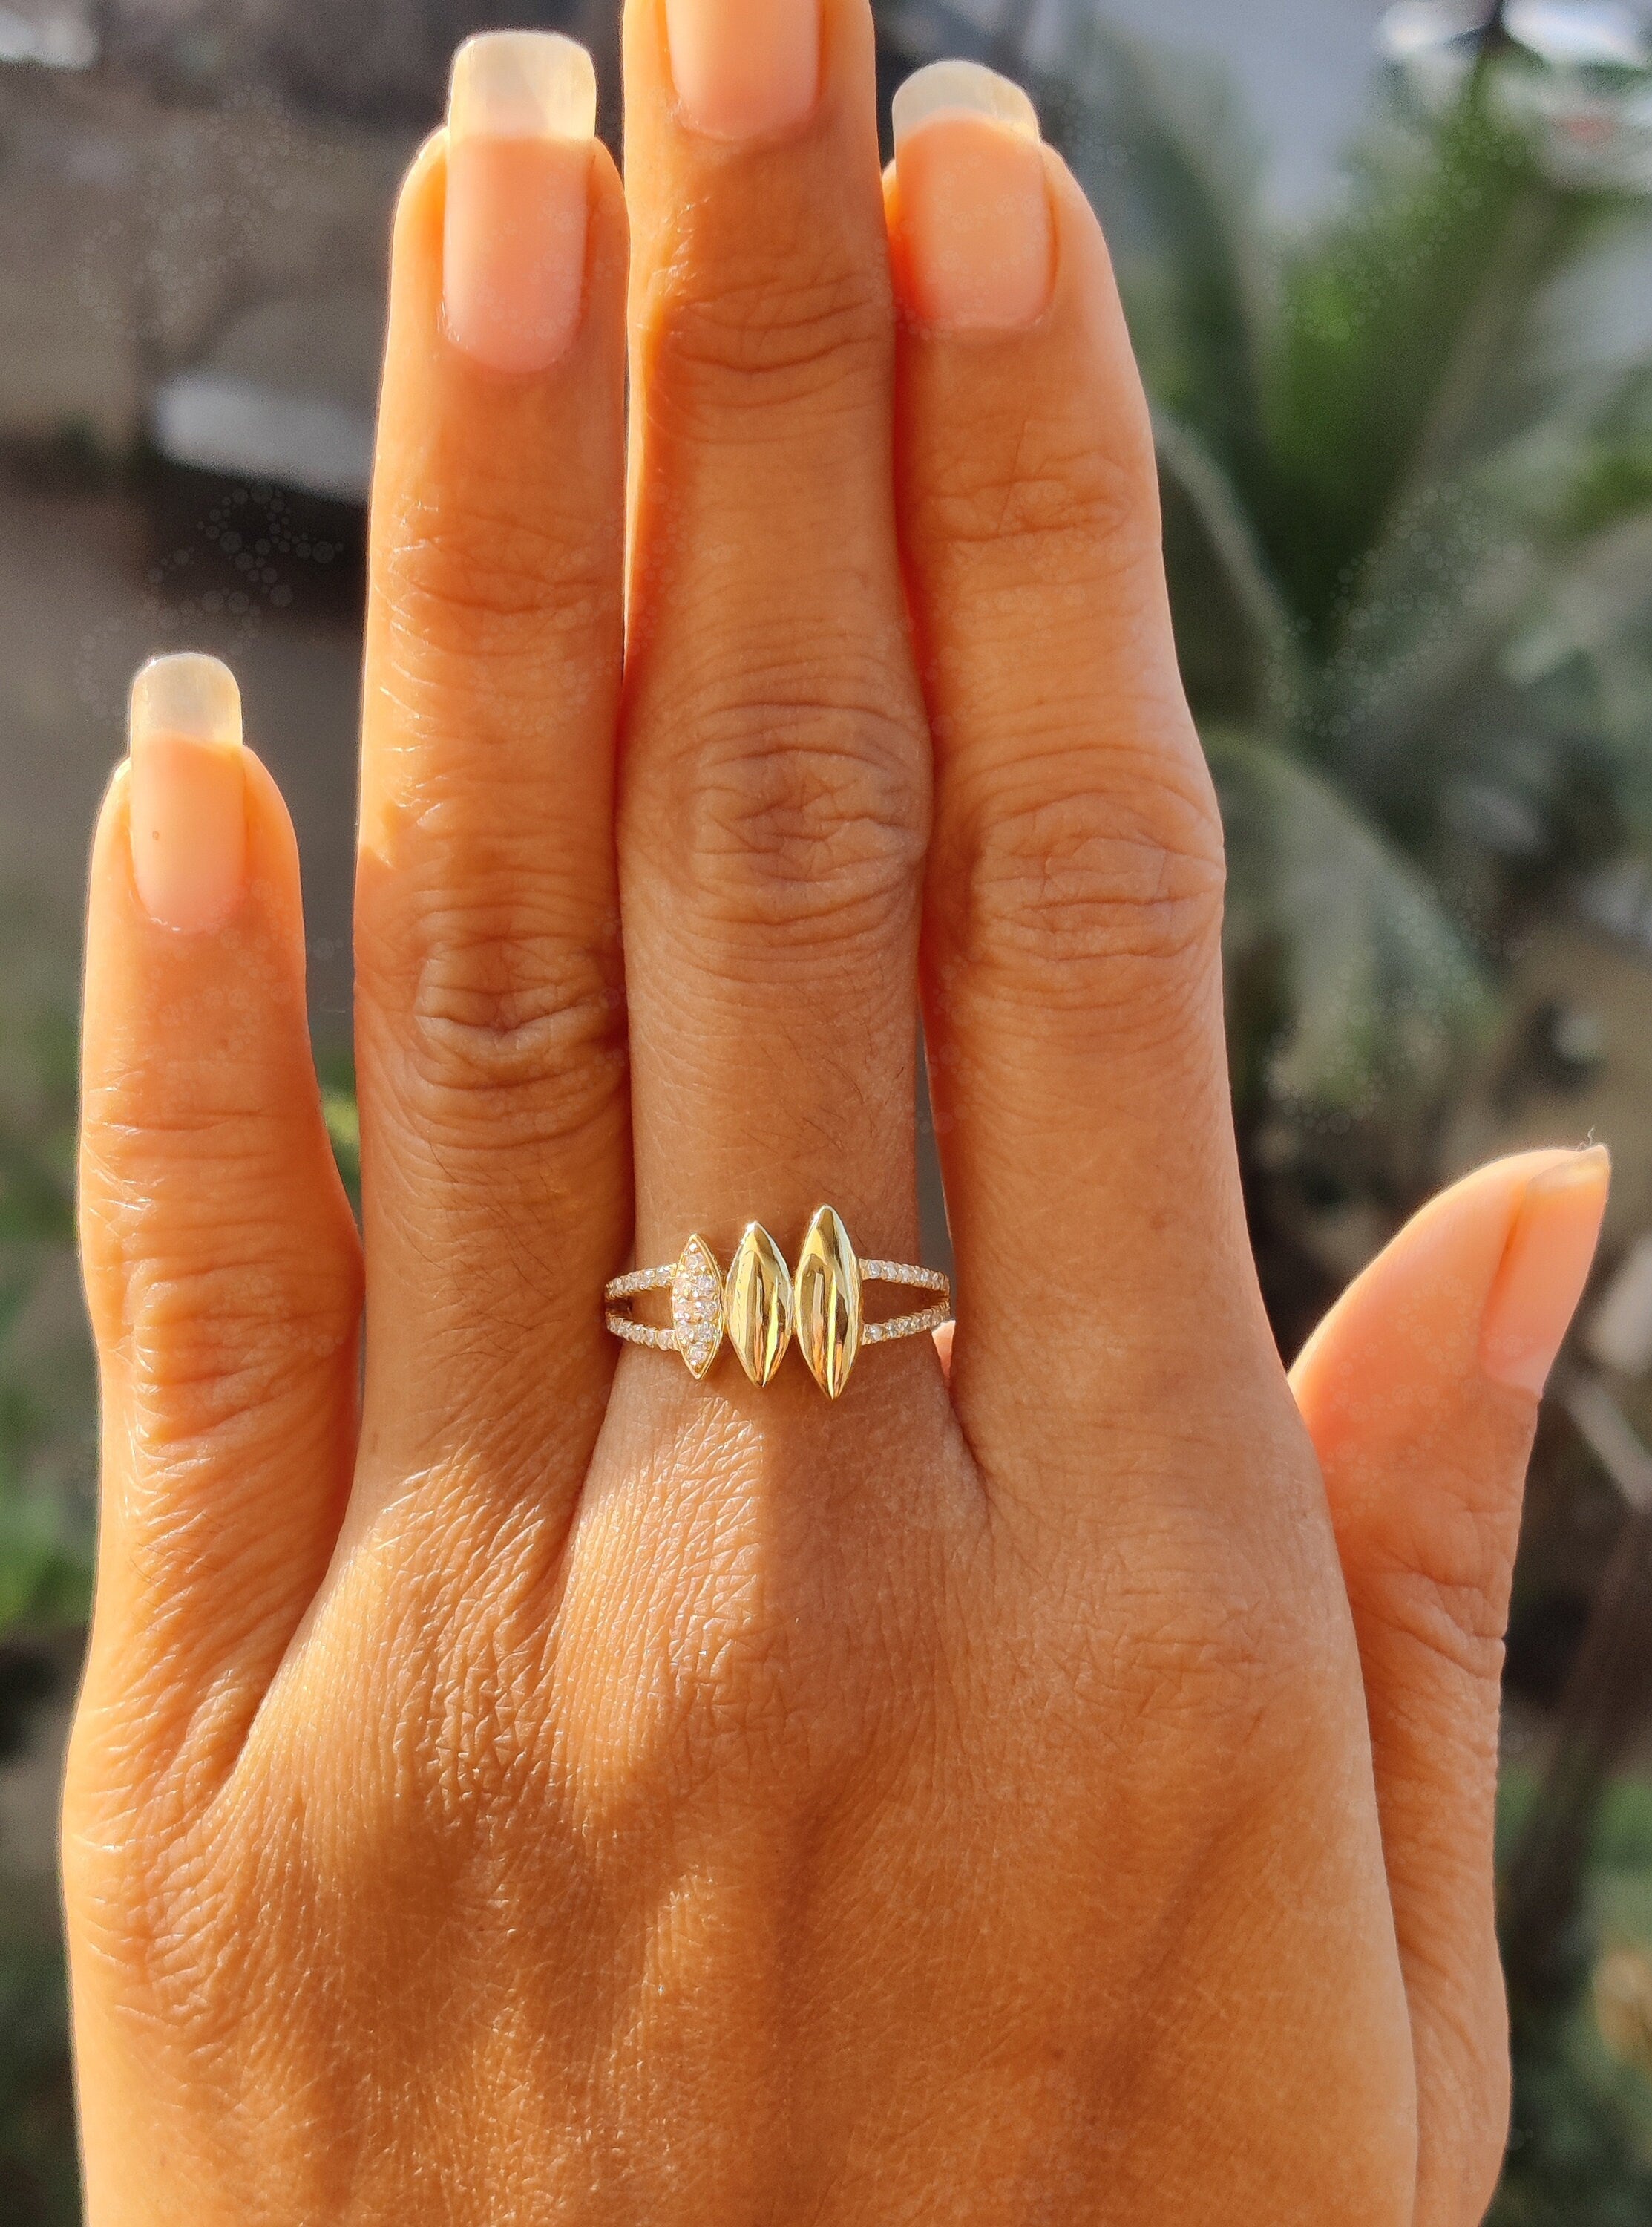 Silver and Solid Gold Moissanite Ring - Stackable Anniversary Ring - Unique Bridal Jewelry - Dainty Minimalist Women's Ring